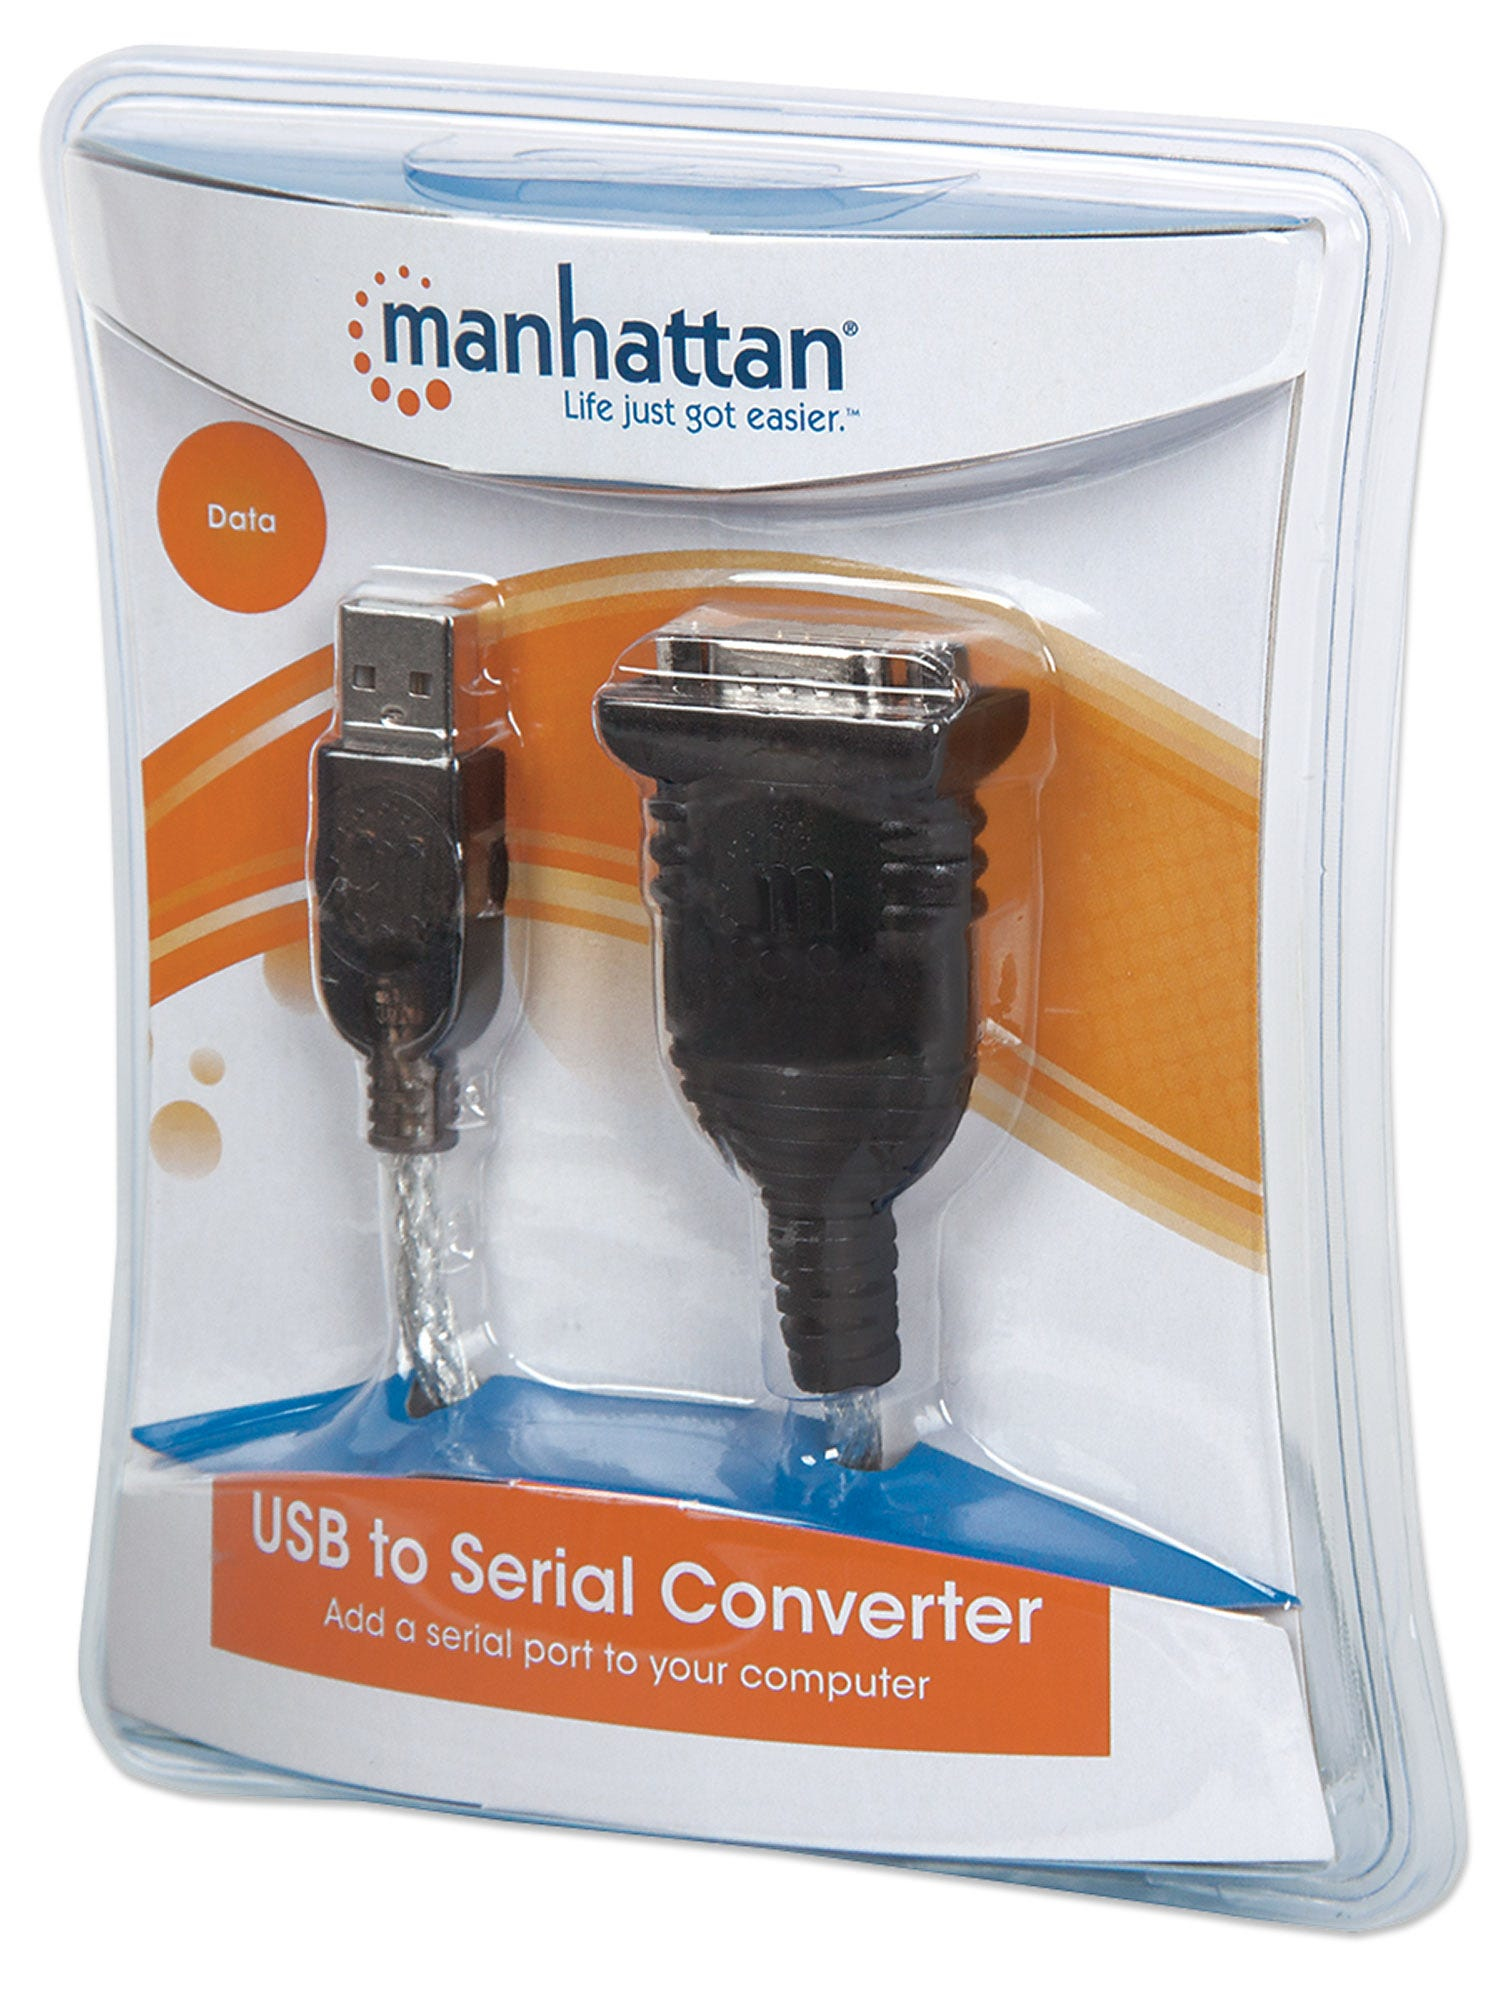 Manhattan USB-A to Serial Converter cable, 45cm, Male to Male, Serial/RS232/COM/DB9, Prolific PL-2303RA Chip, Black/Silver cable, Blister